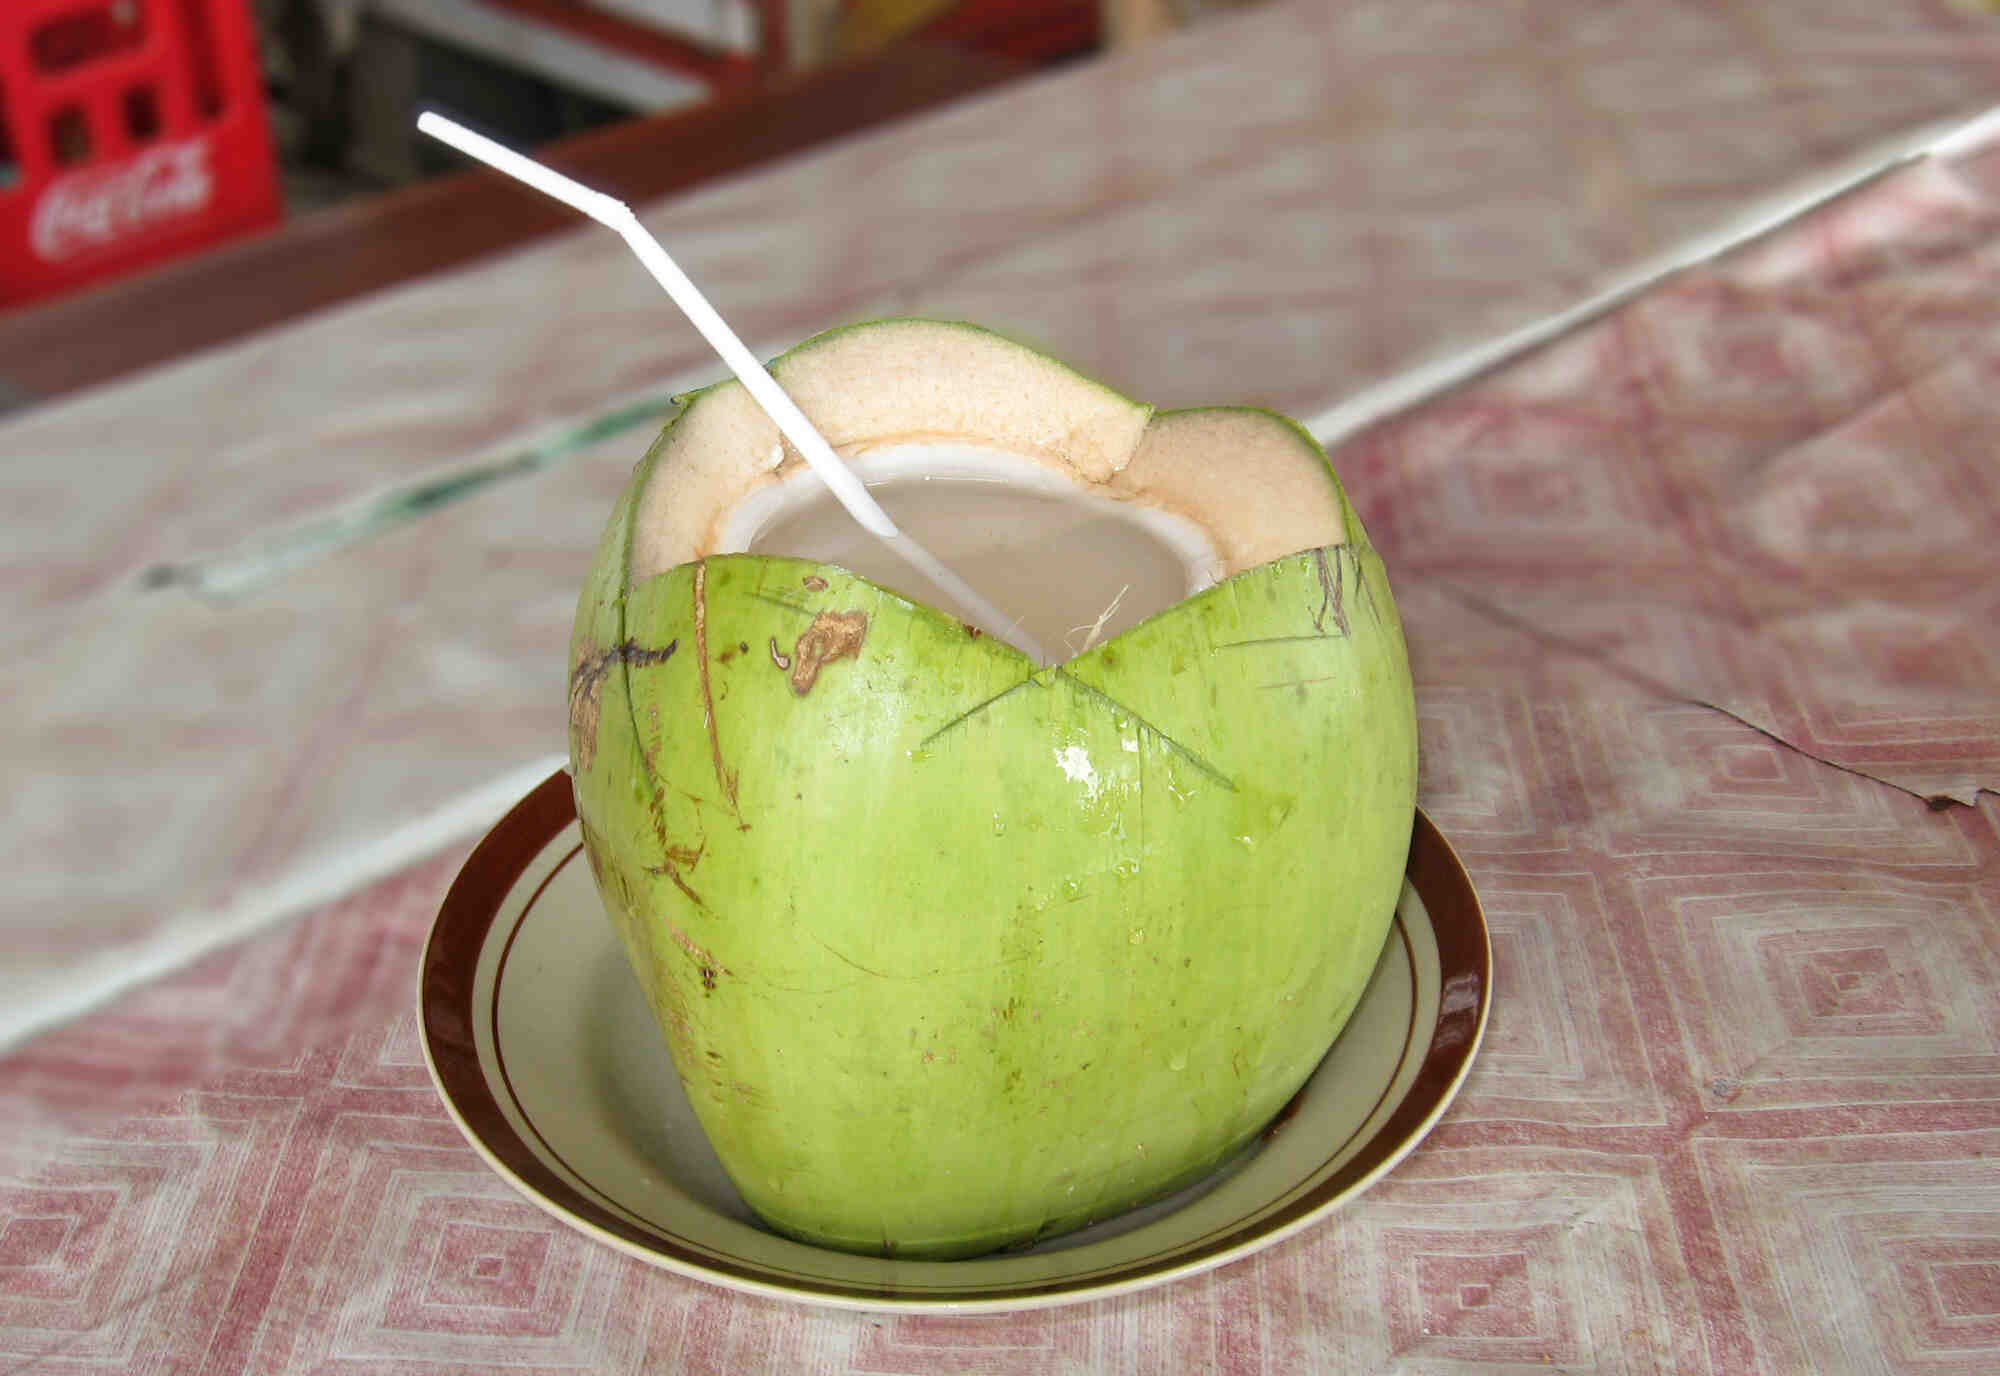 What is coconut water called in English?